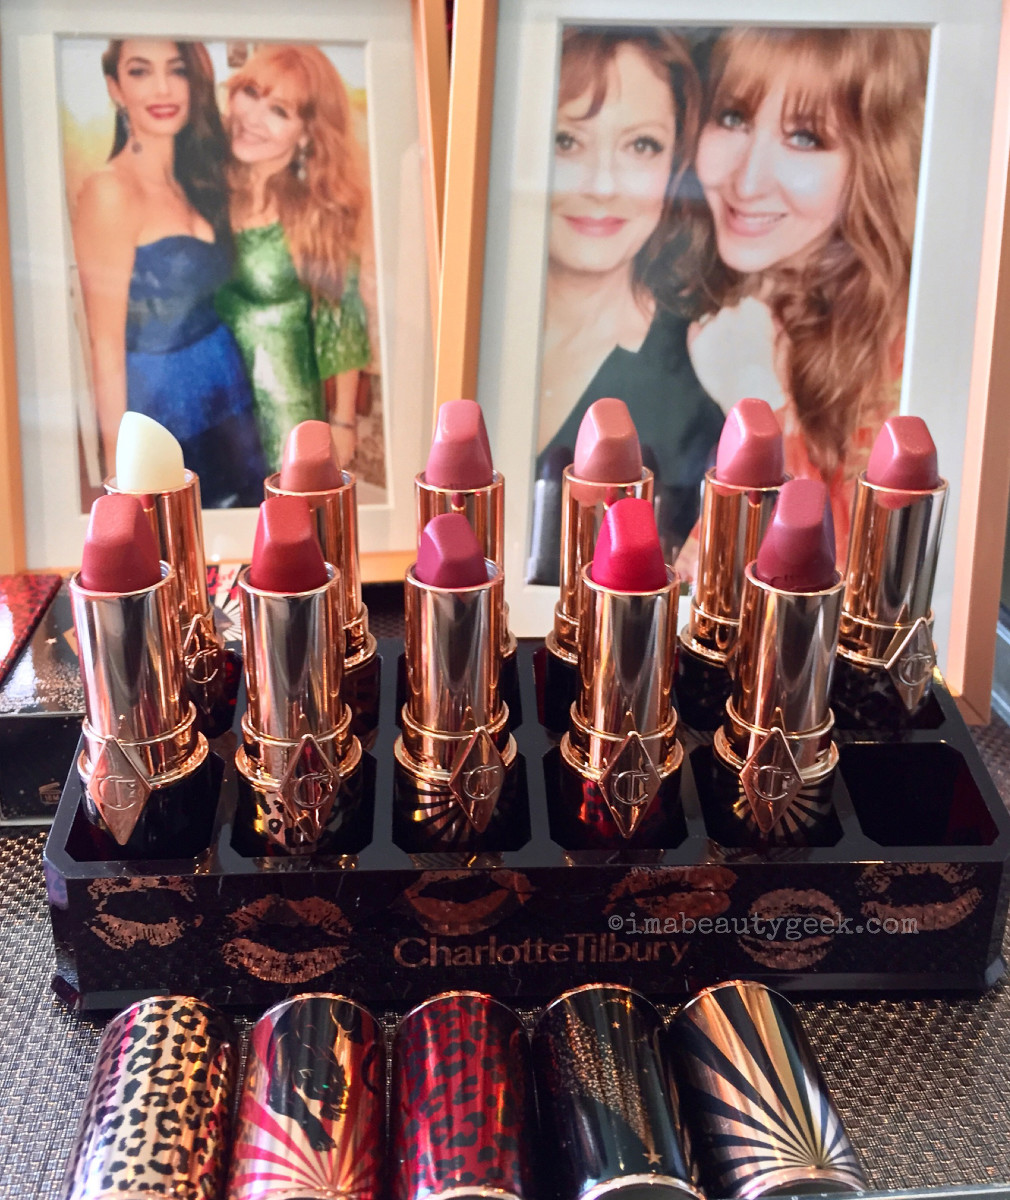 Charlotte Tilbury Hot Lips 2 collection: 10 shades of lipstick and 1 conditioning lip balm